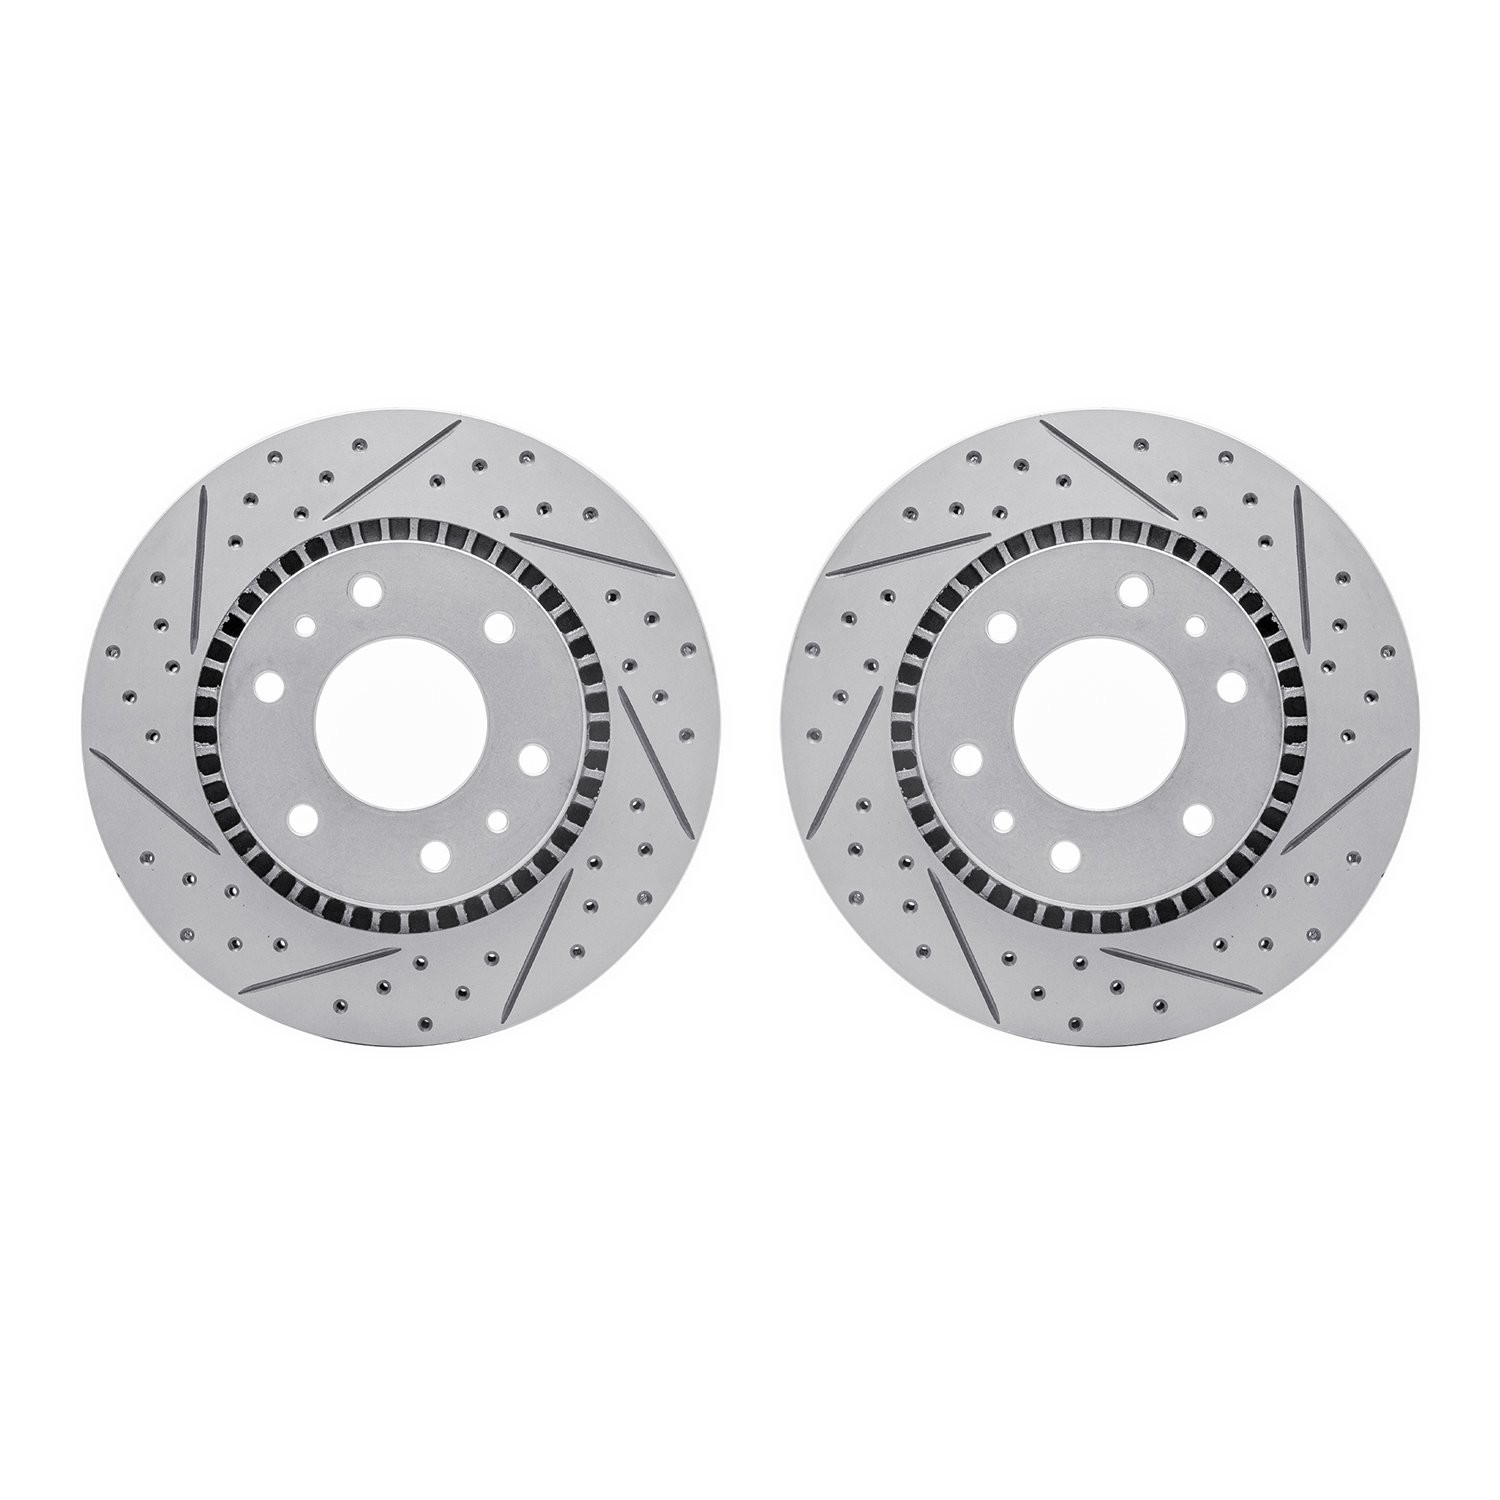 2002-48004 Geoperformance Drilled/Slotted Brake Rotors, 2006-2009 GM, Position: Front